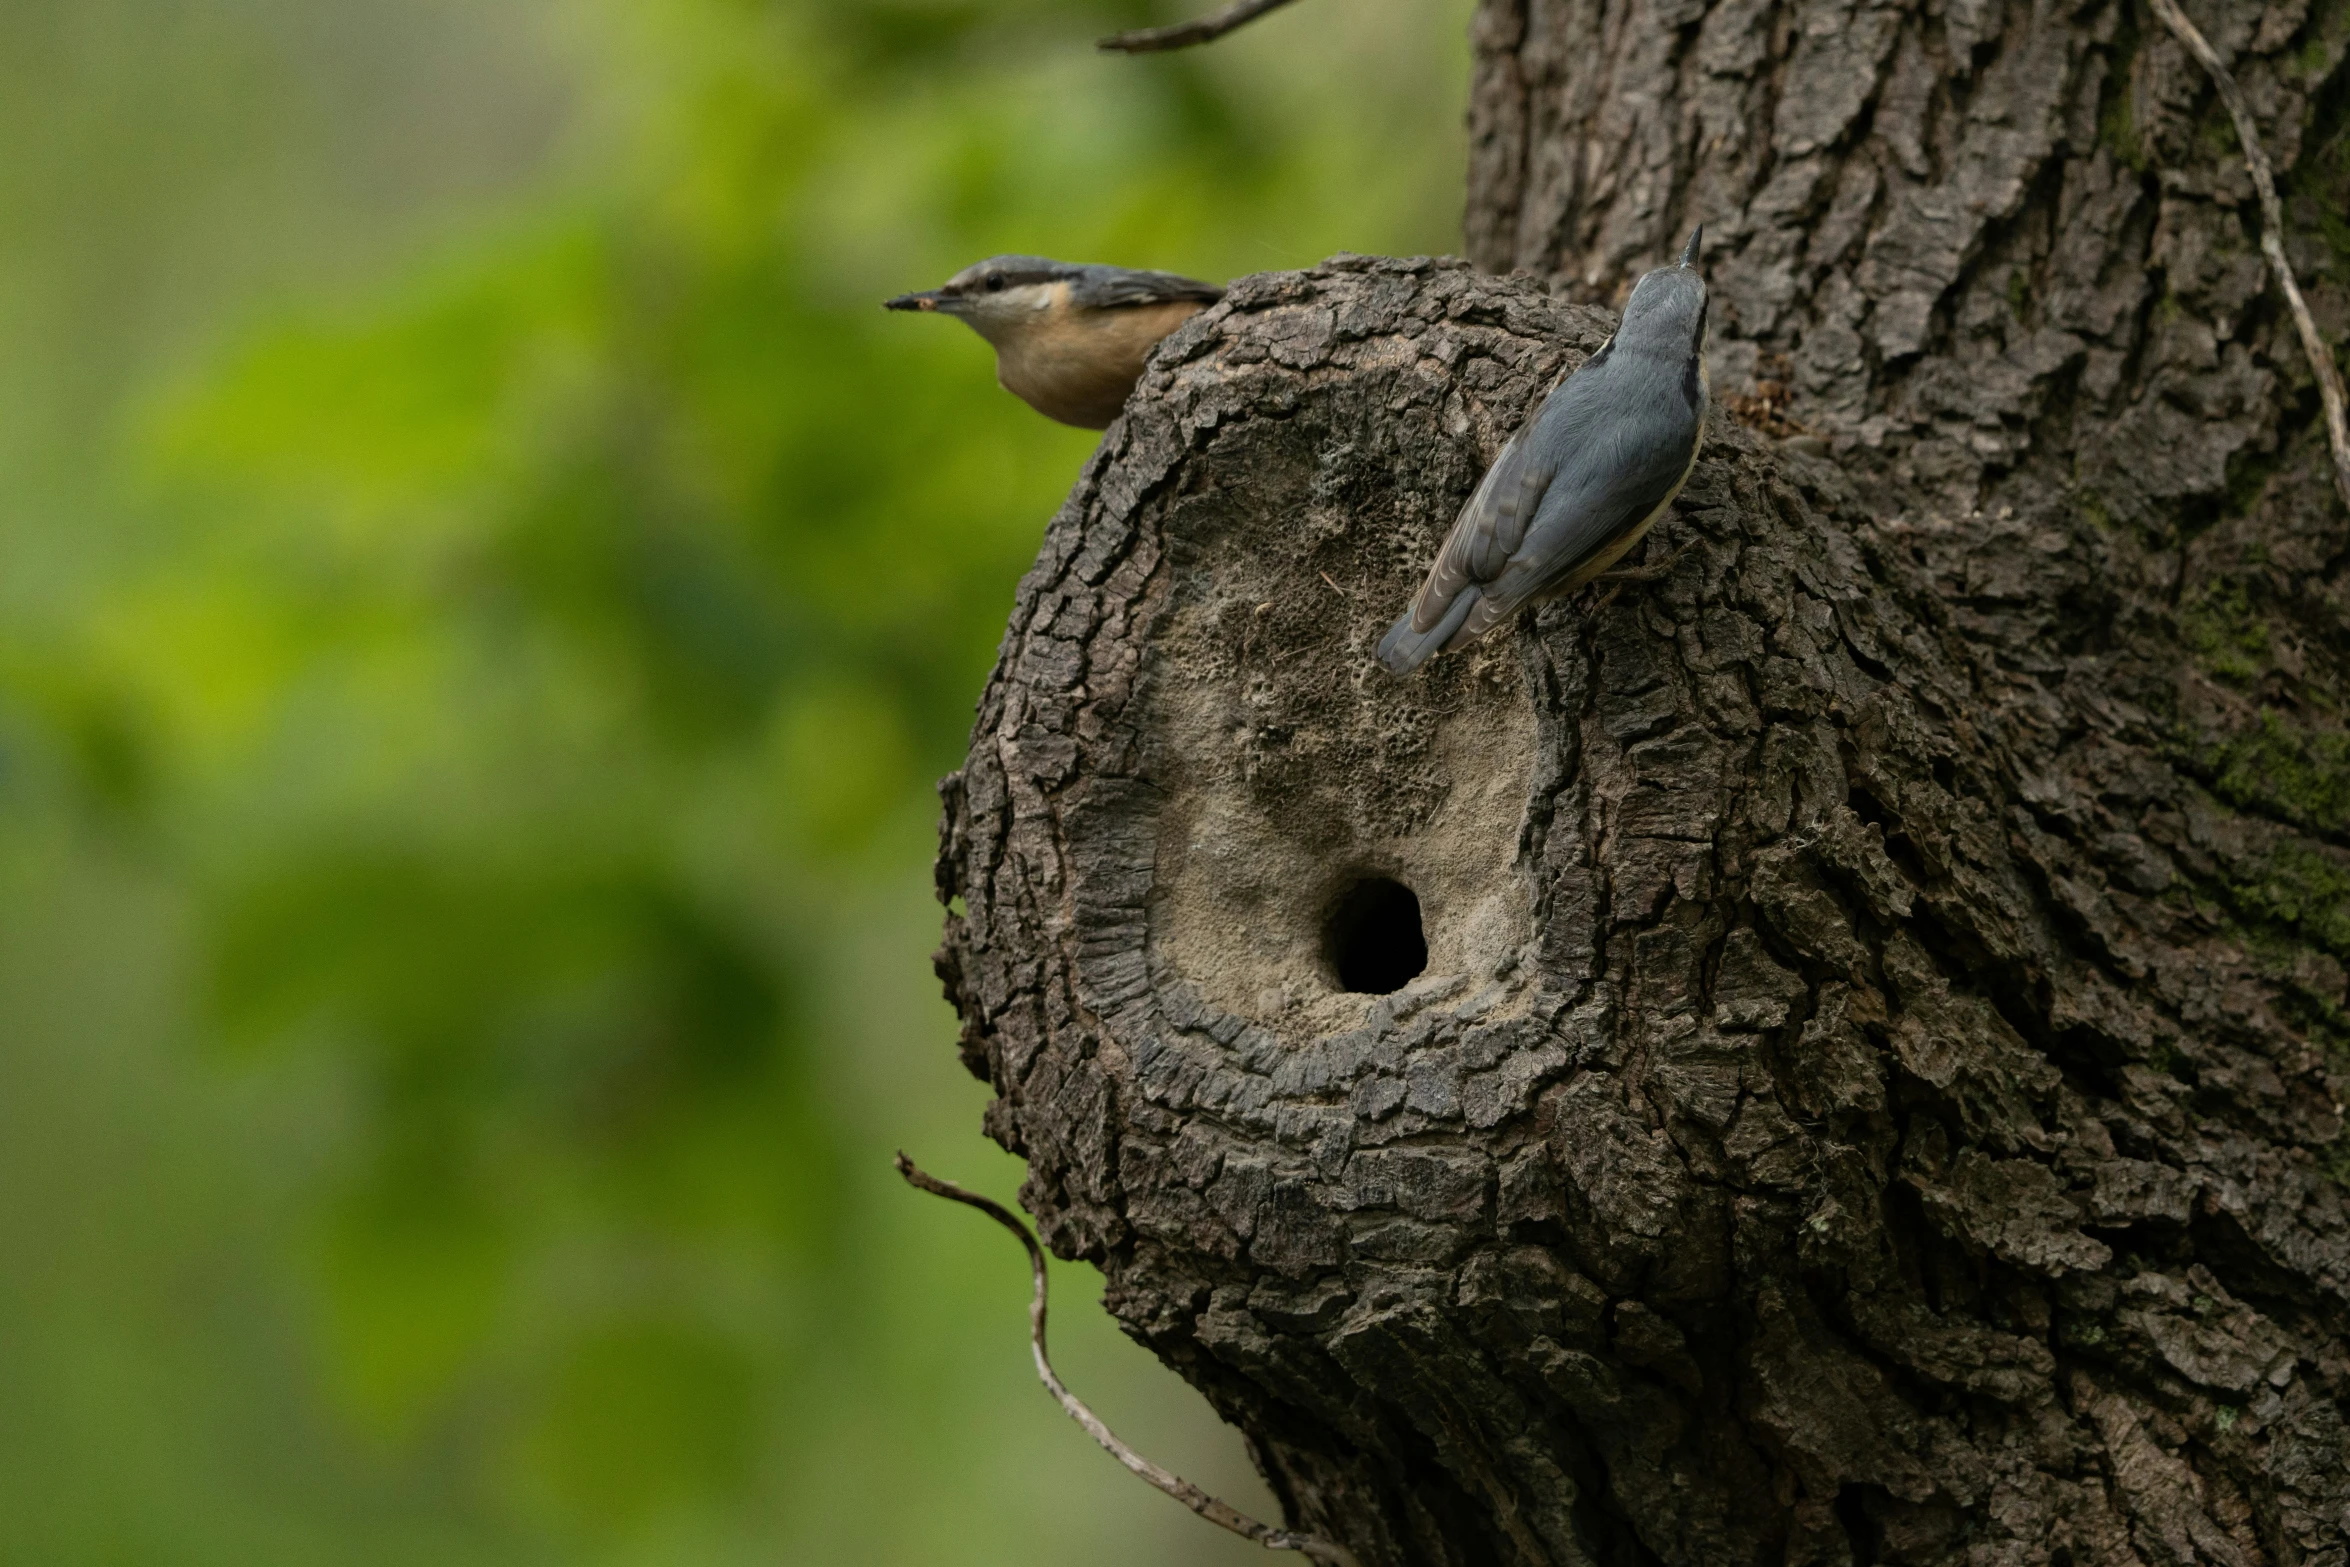 two small birds sit on the side of a tree trunk